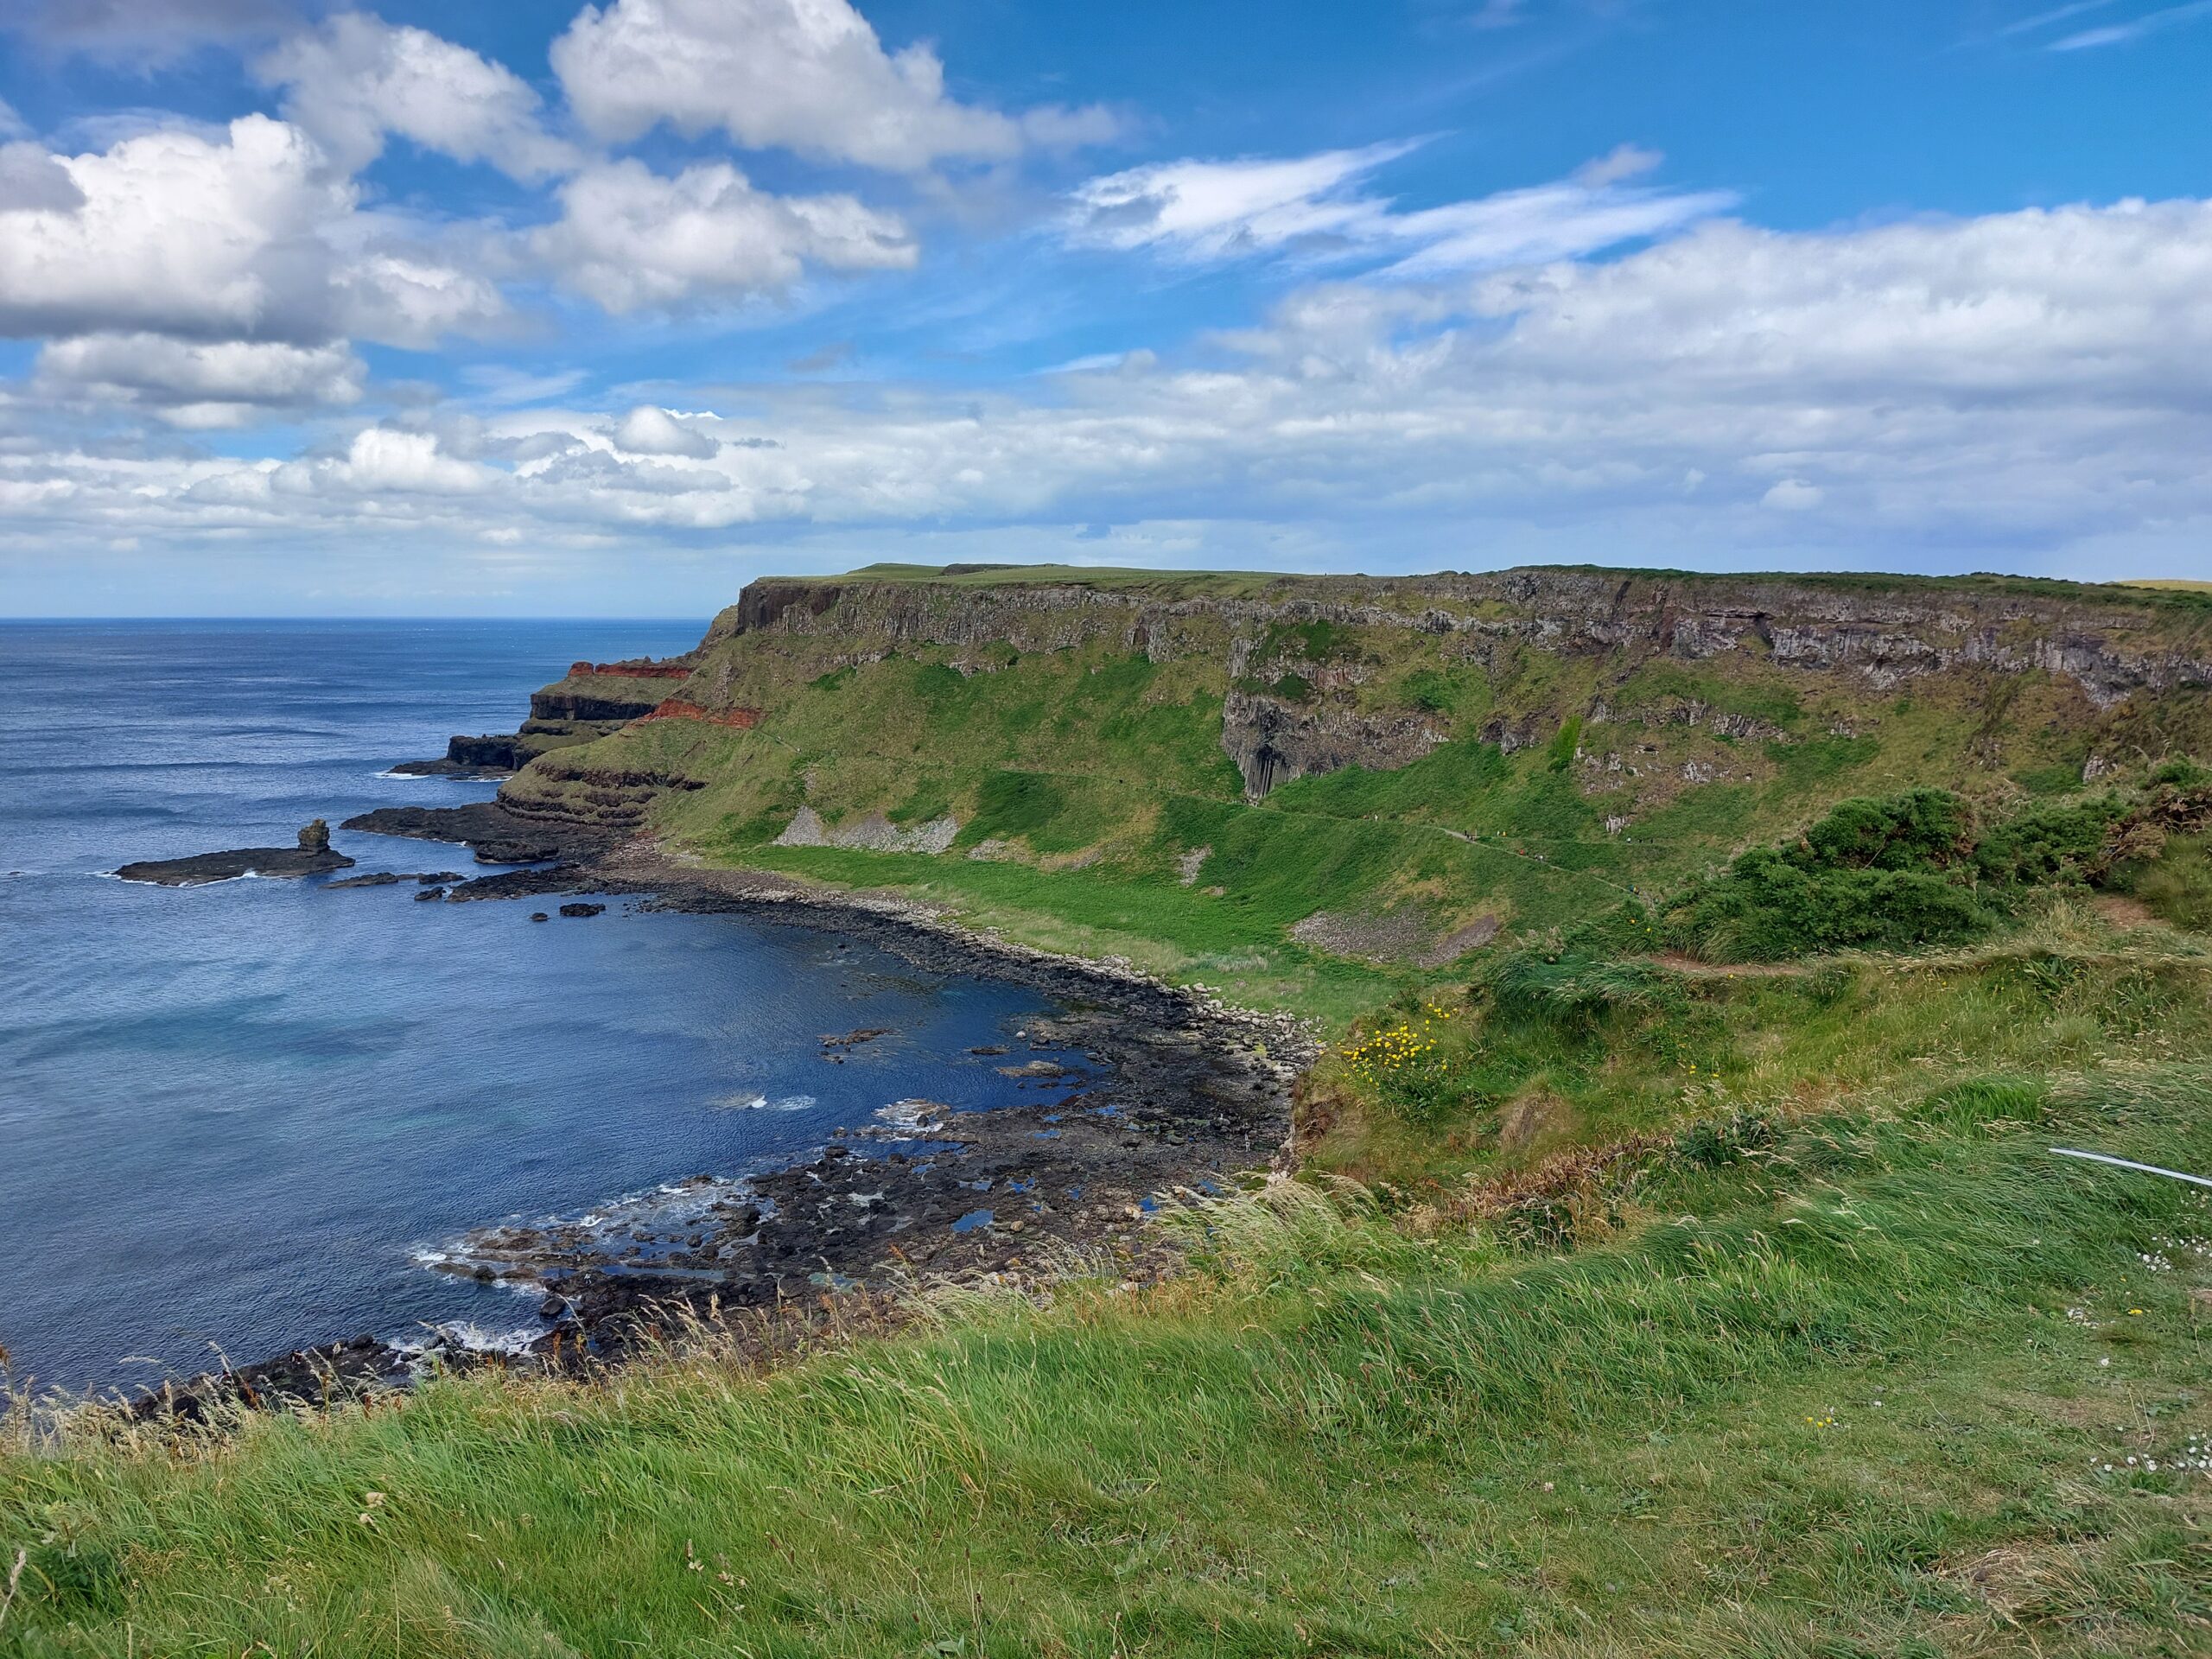 Northern Ireland is great for solo female travellers!